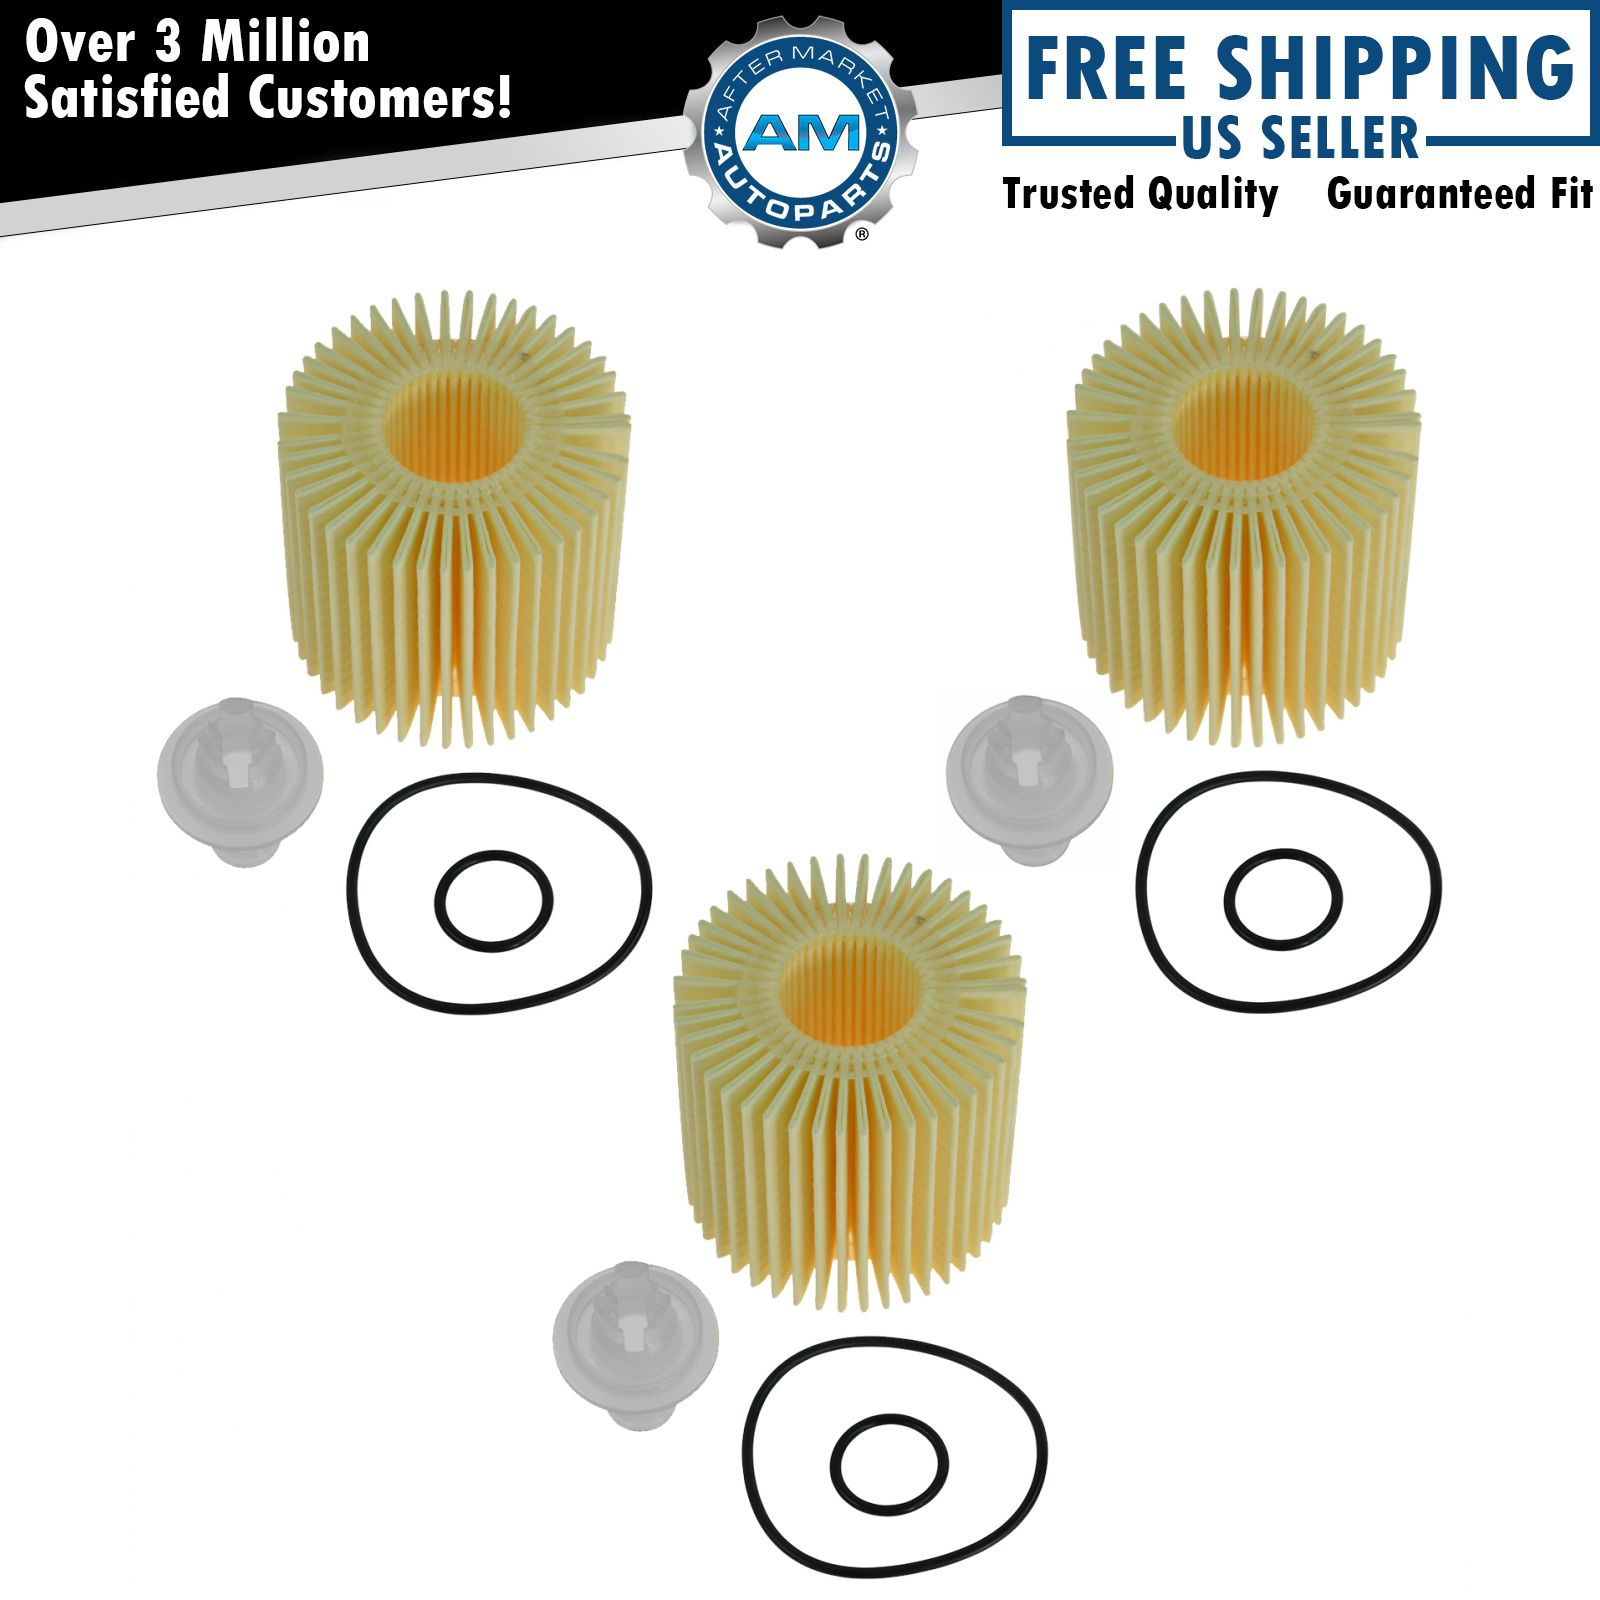 OEM 04152-YZZA1 Engine Oil Filter Cartridge Pack of 3 for Toyota Lexus Scion New